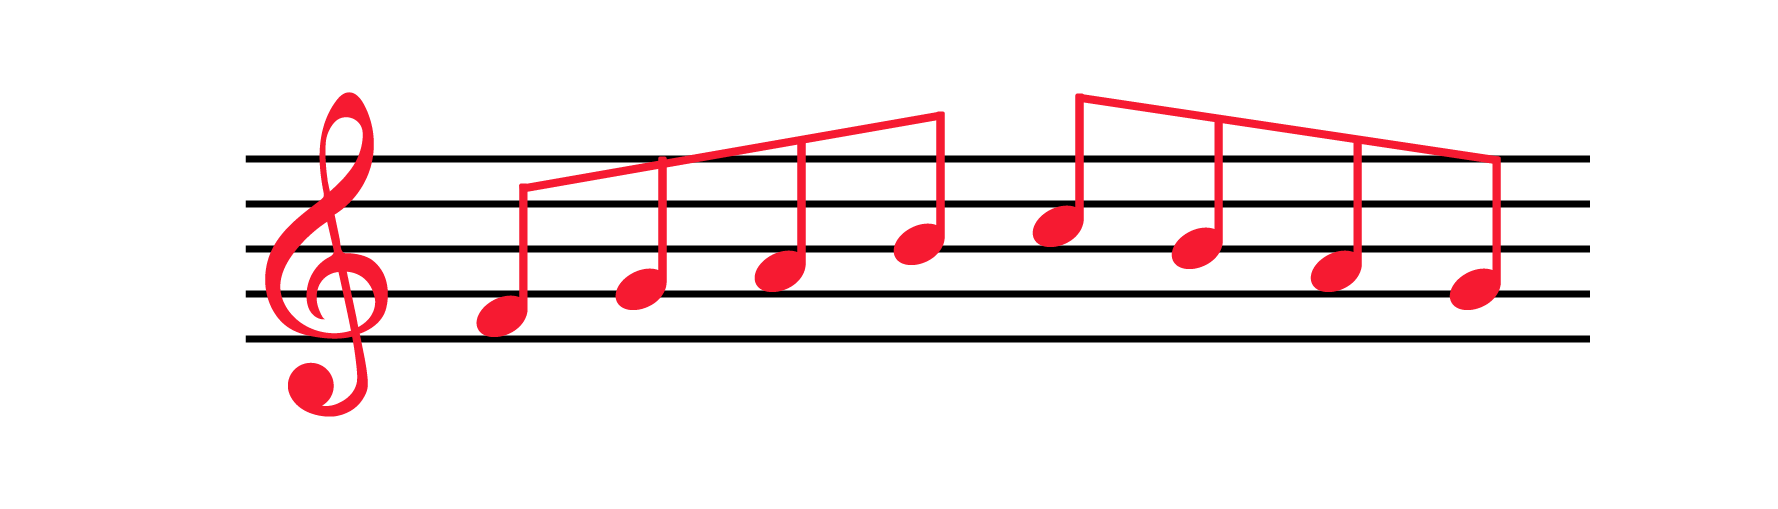 Treble clef with 8 red eighth notes going up four steps and down four steps.